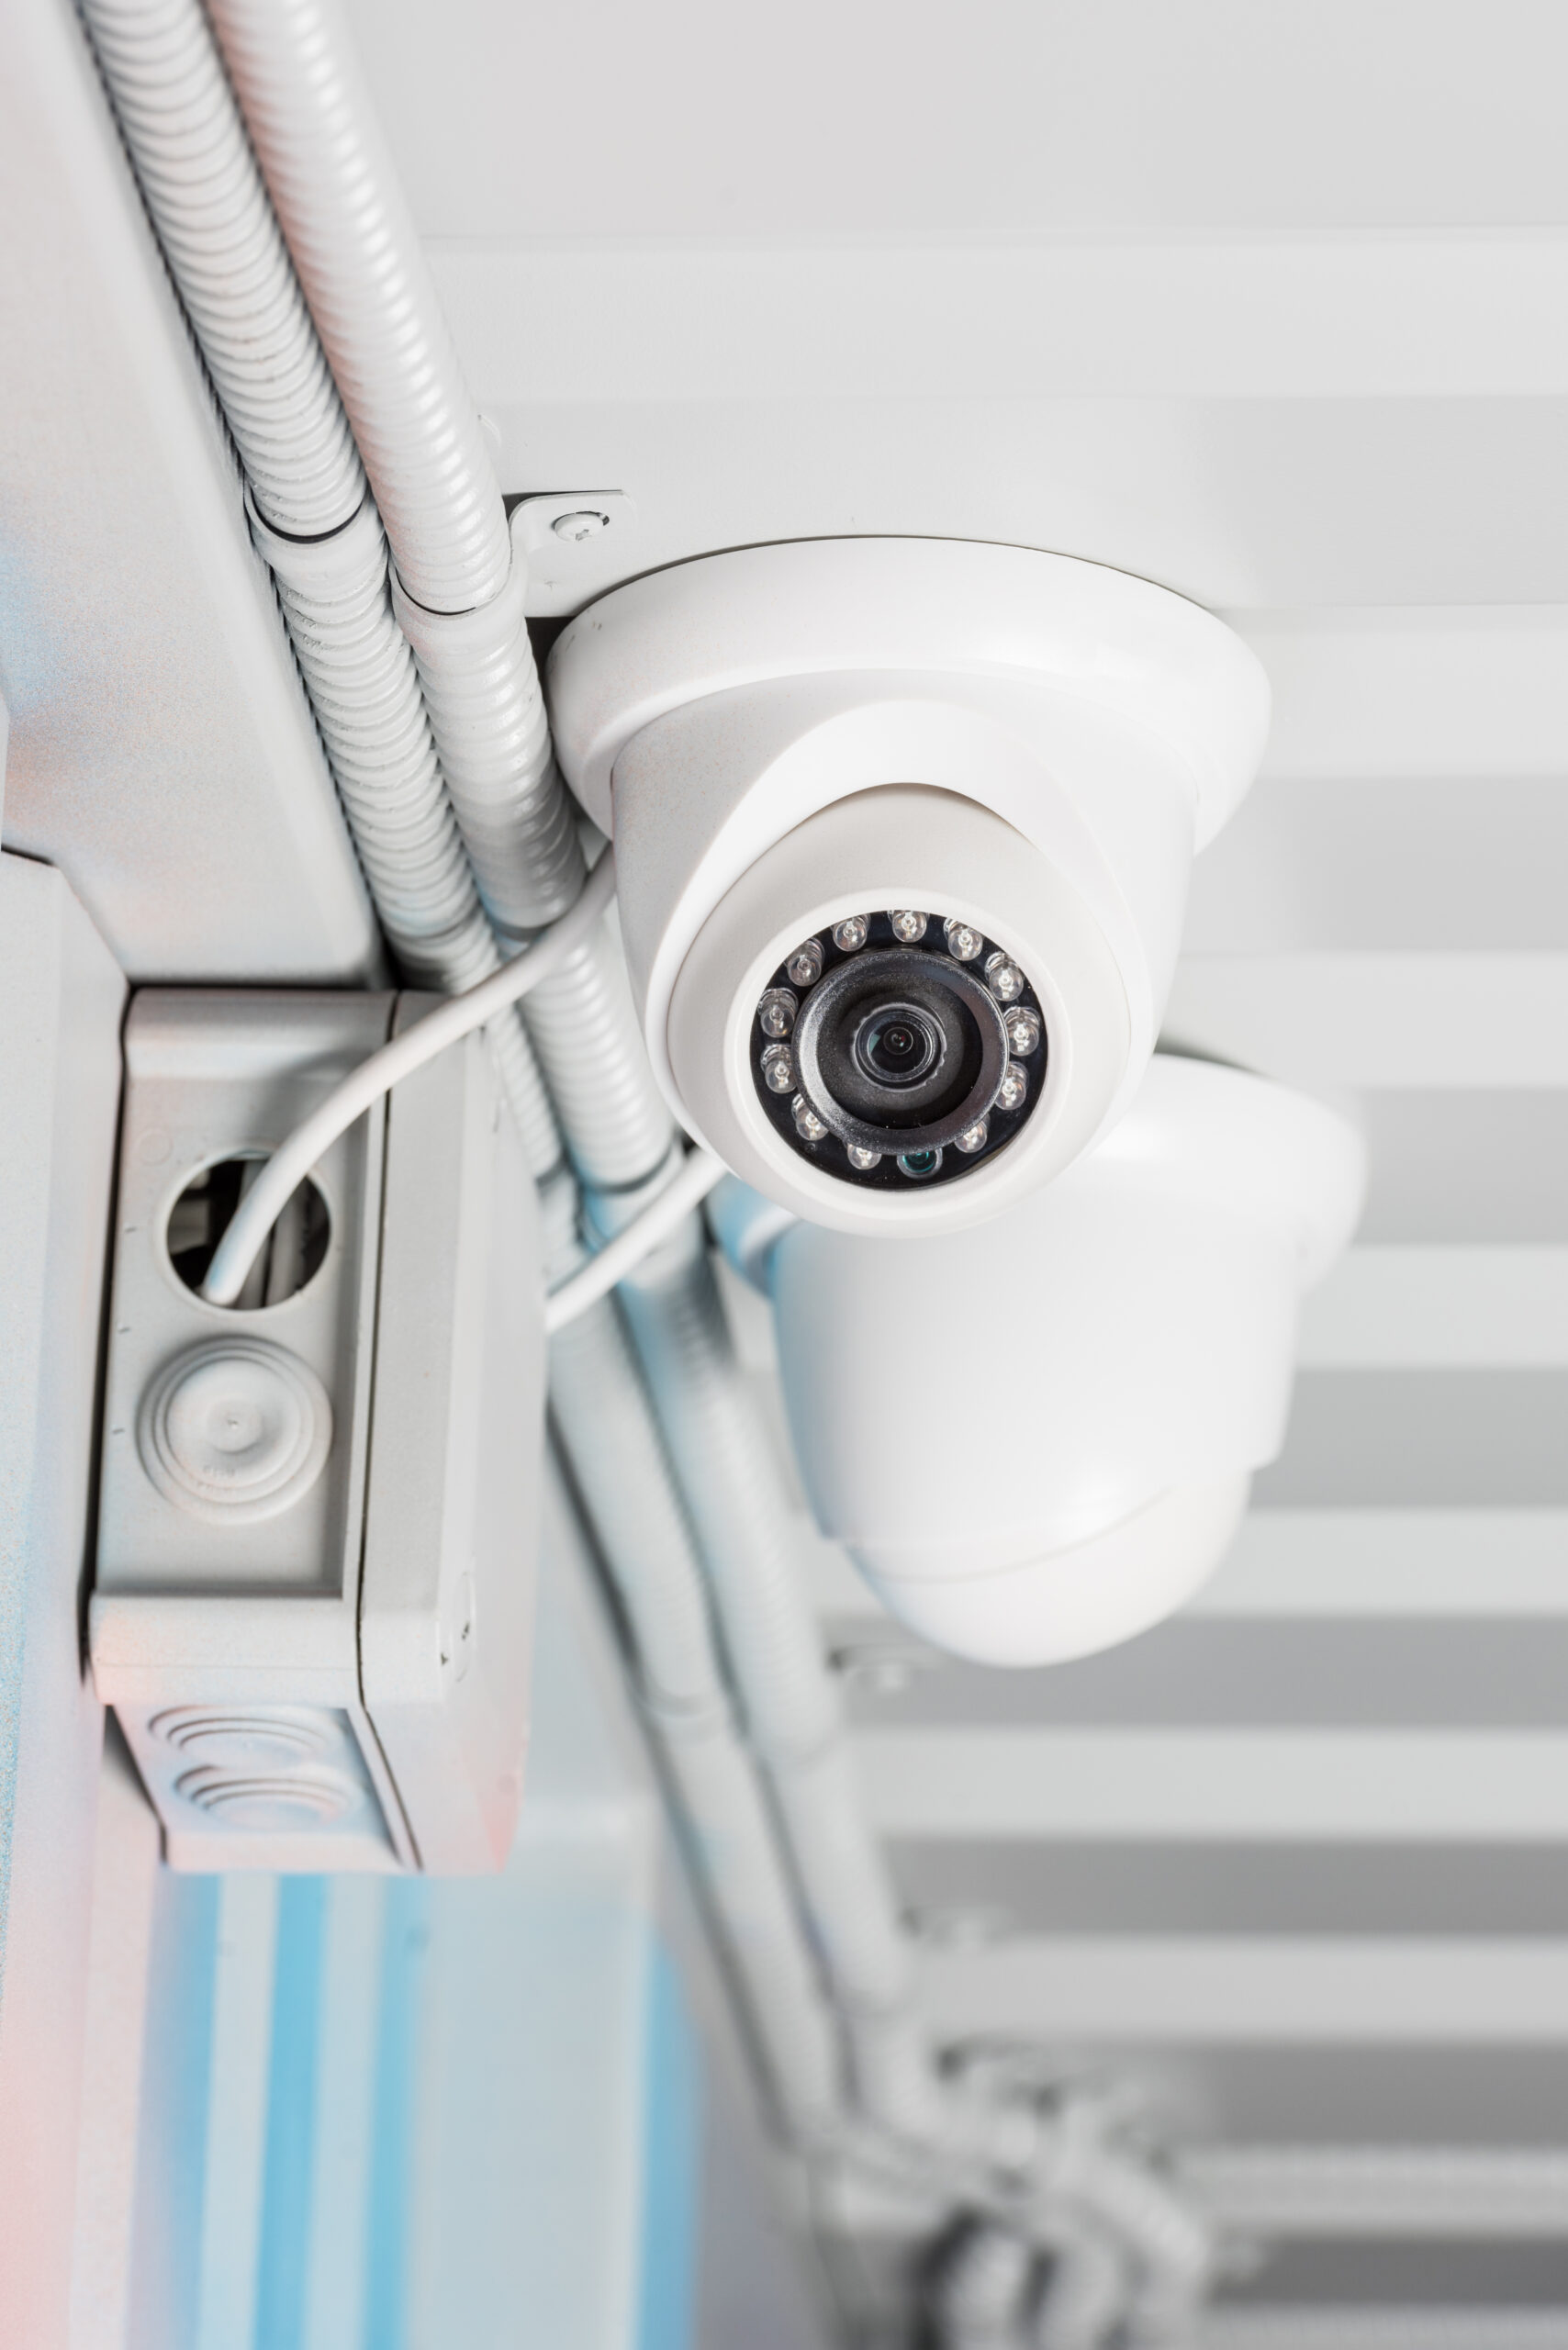 White Security Camera On Ceiling, Home Security System Concept